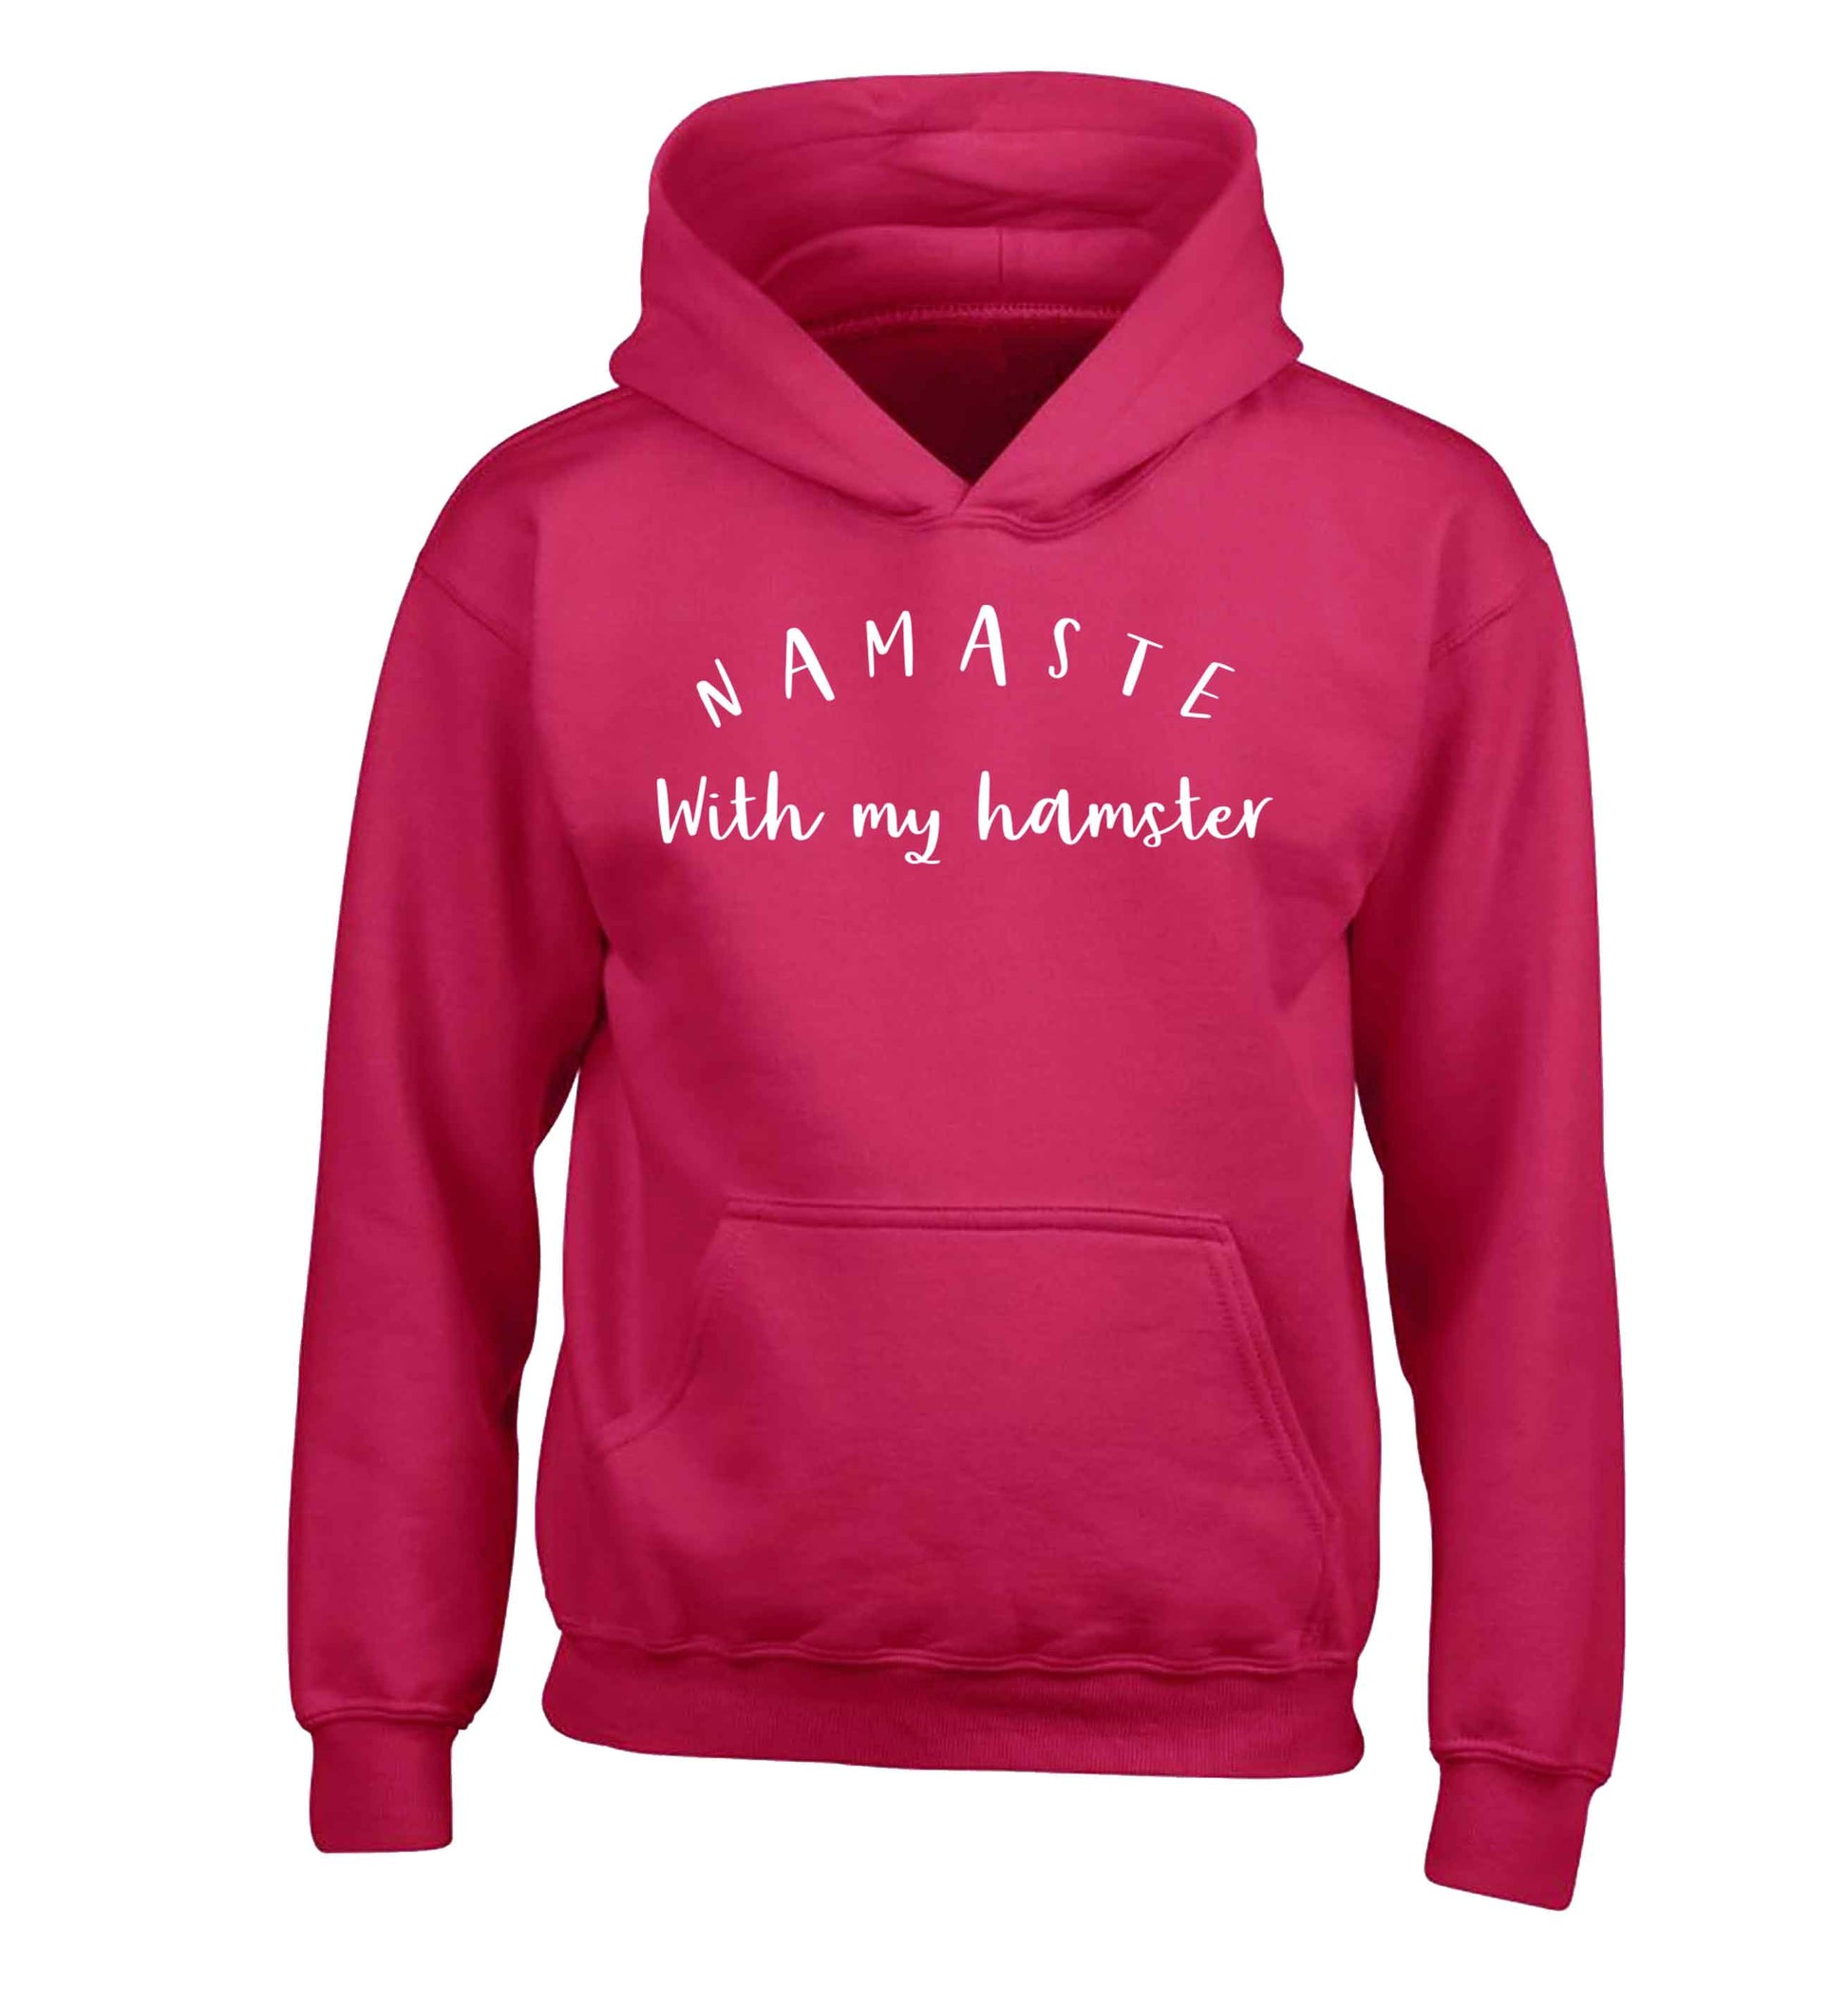 Namaste with my hamster children's pink hoodie 12-13 Years